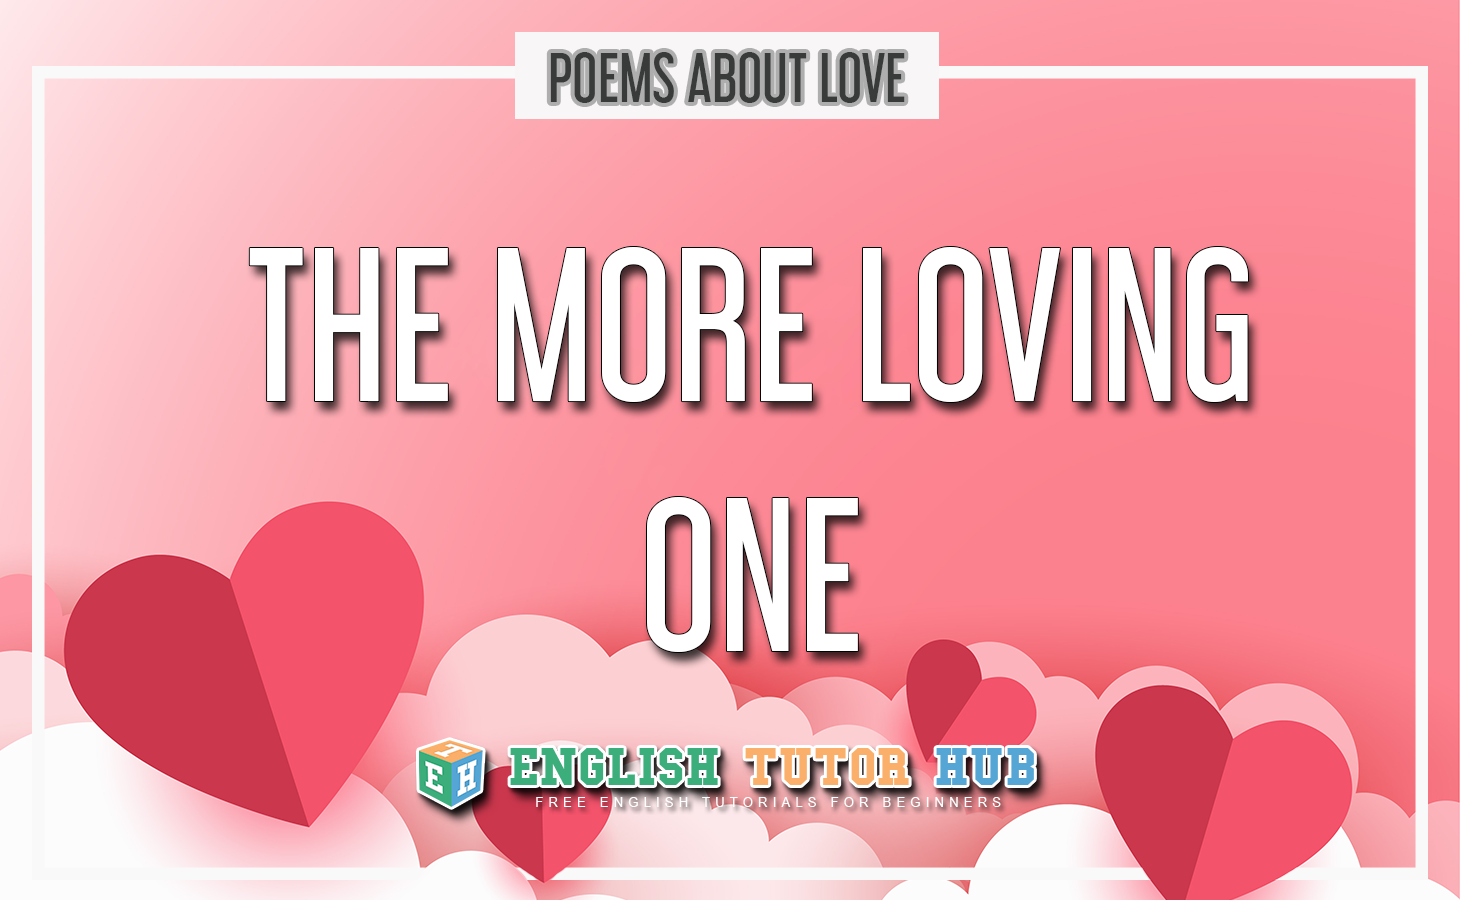 The More Loving One Poems About Love 